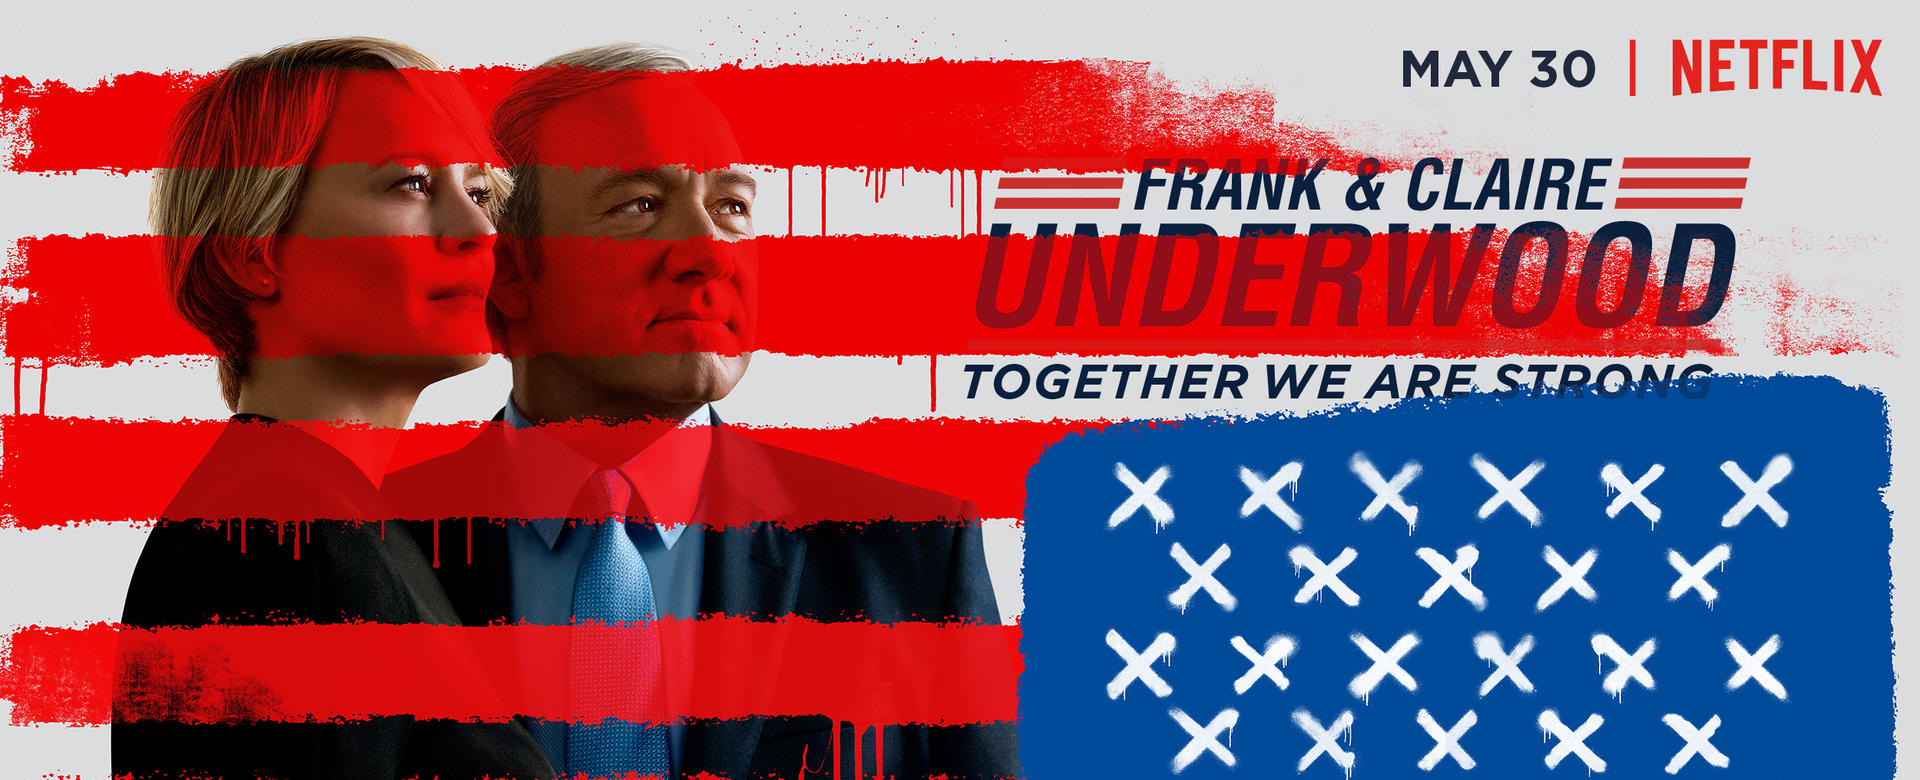 House of Cards: Season 5 TV Show Poster